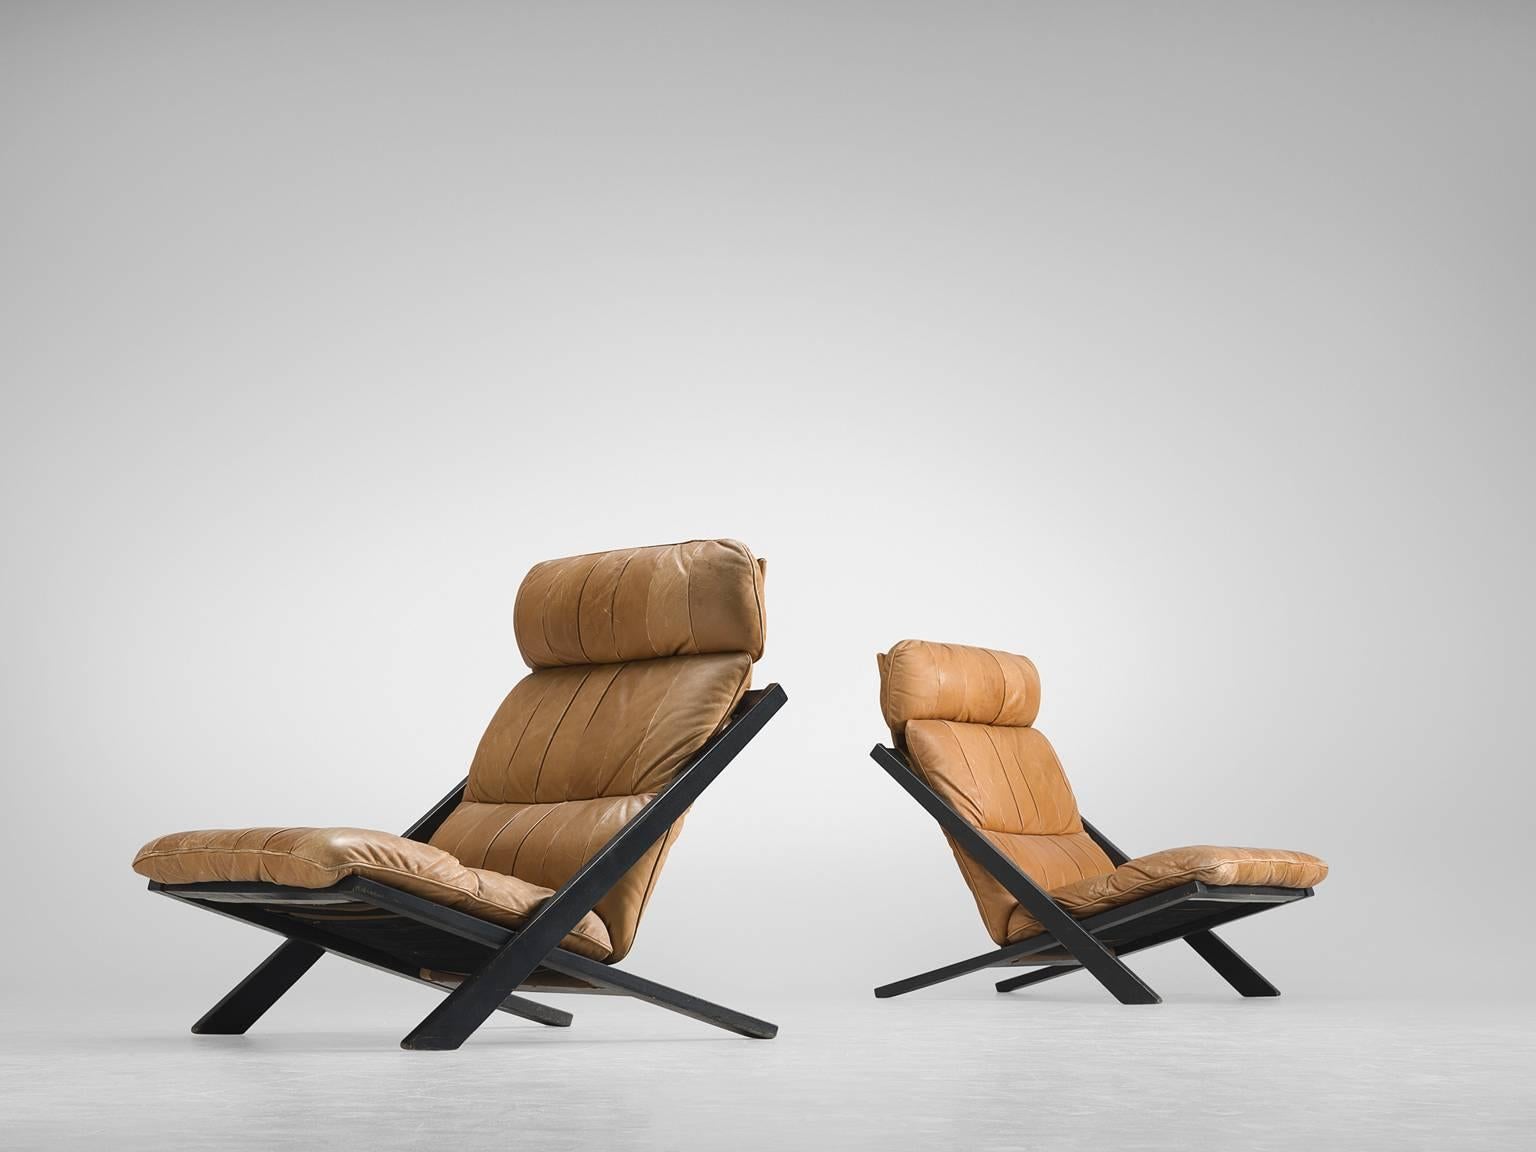 Pair of lounge chairs, in wood and leather by Ueli bergere for De Sede, Switzerland, 1970s.

High back lounge chairs by de Swiss quality manufacturer De Sede. The X-shaped frame consists of black lacquered wood. This makes an interesting contrast to